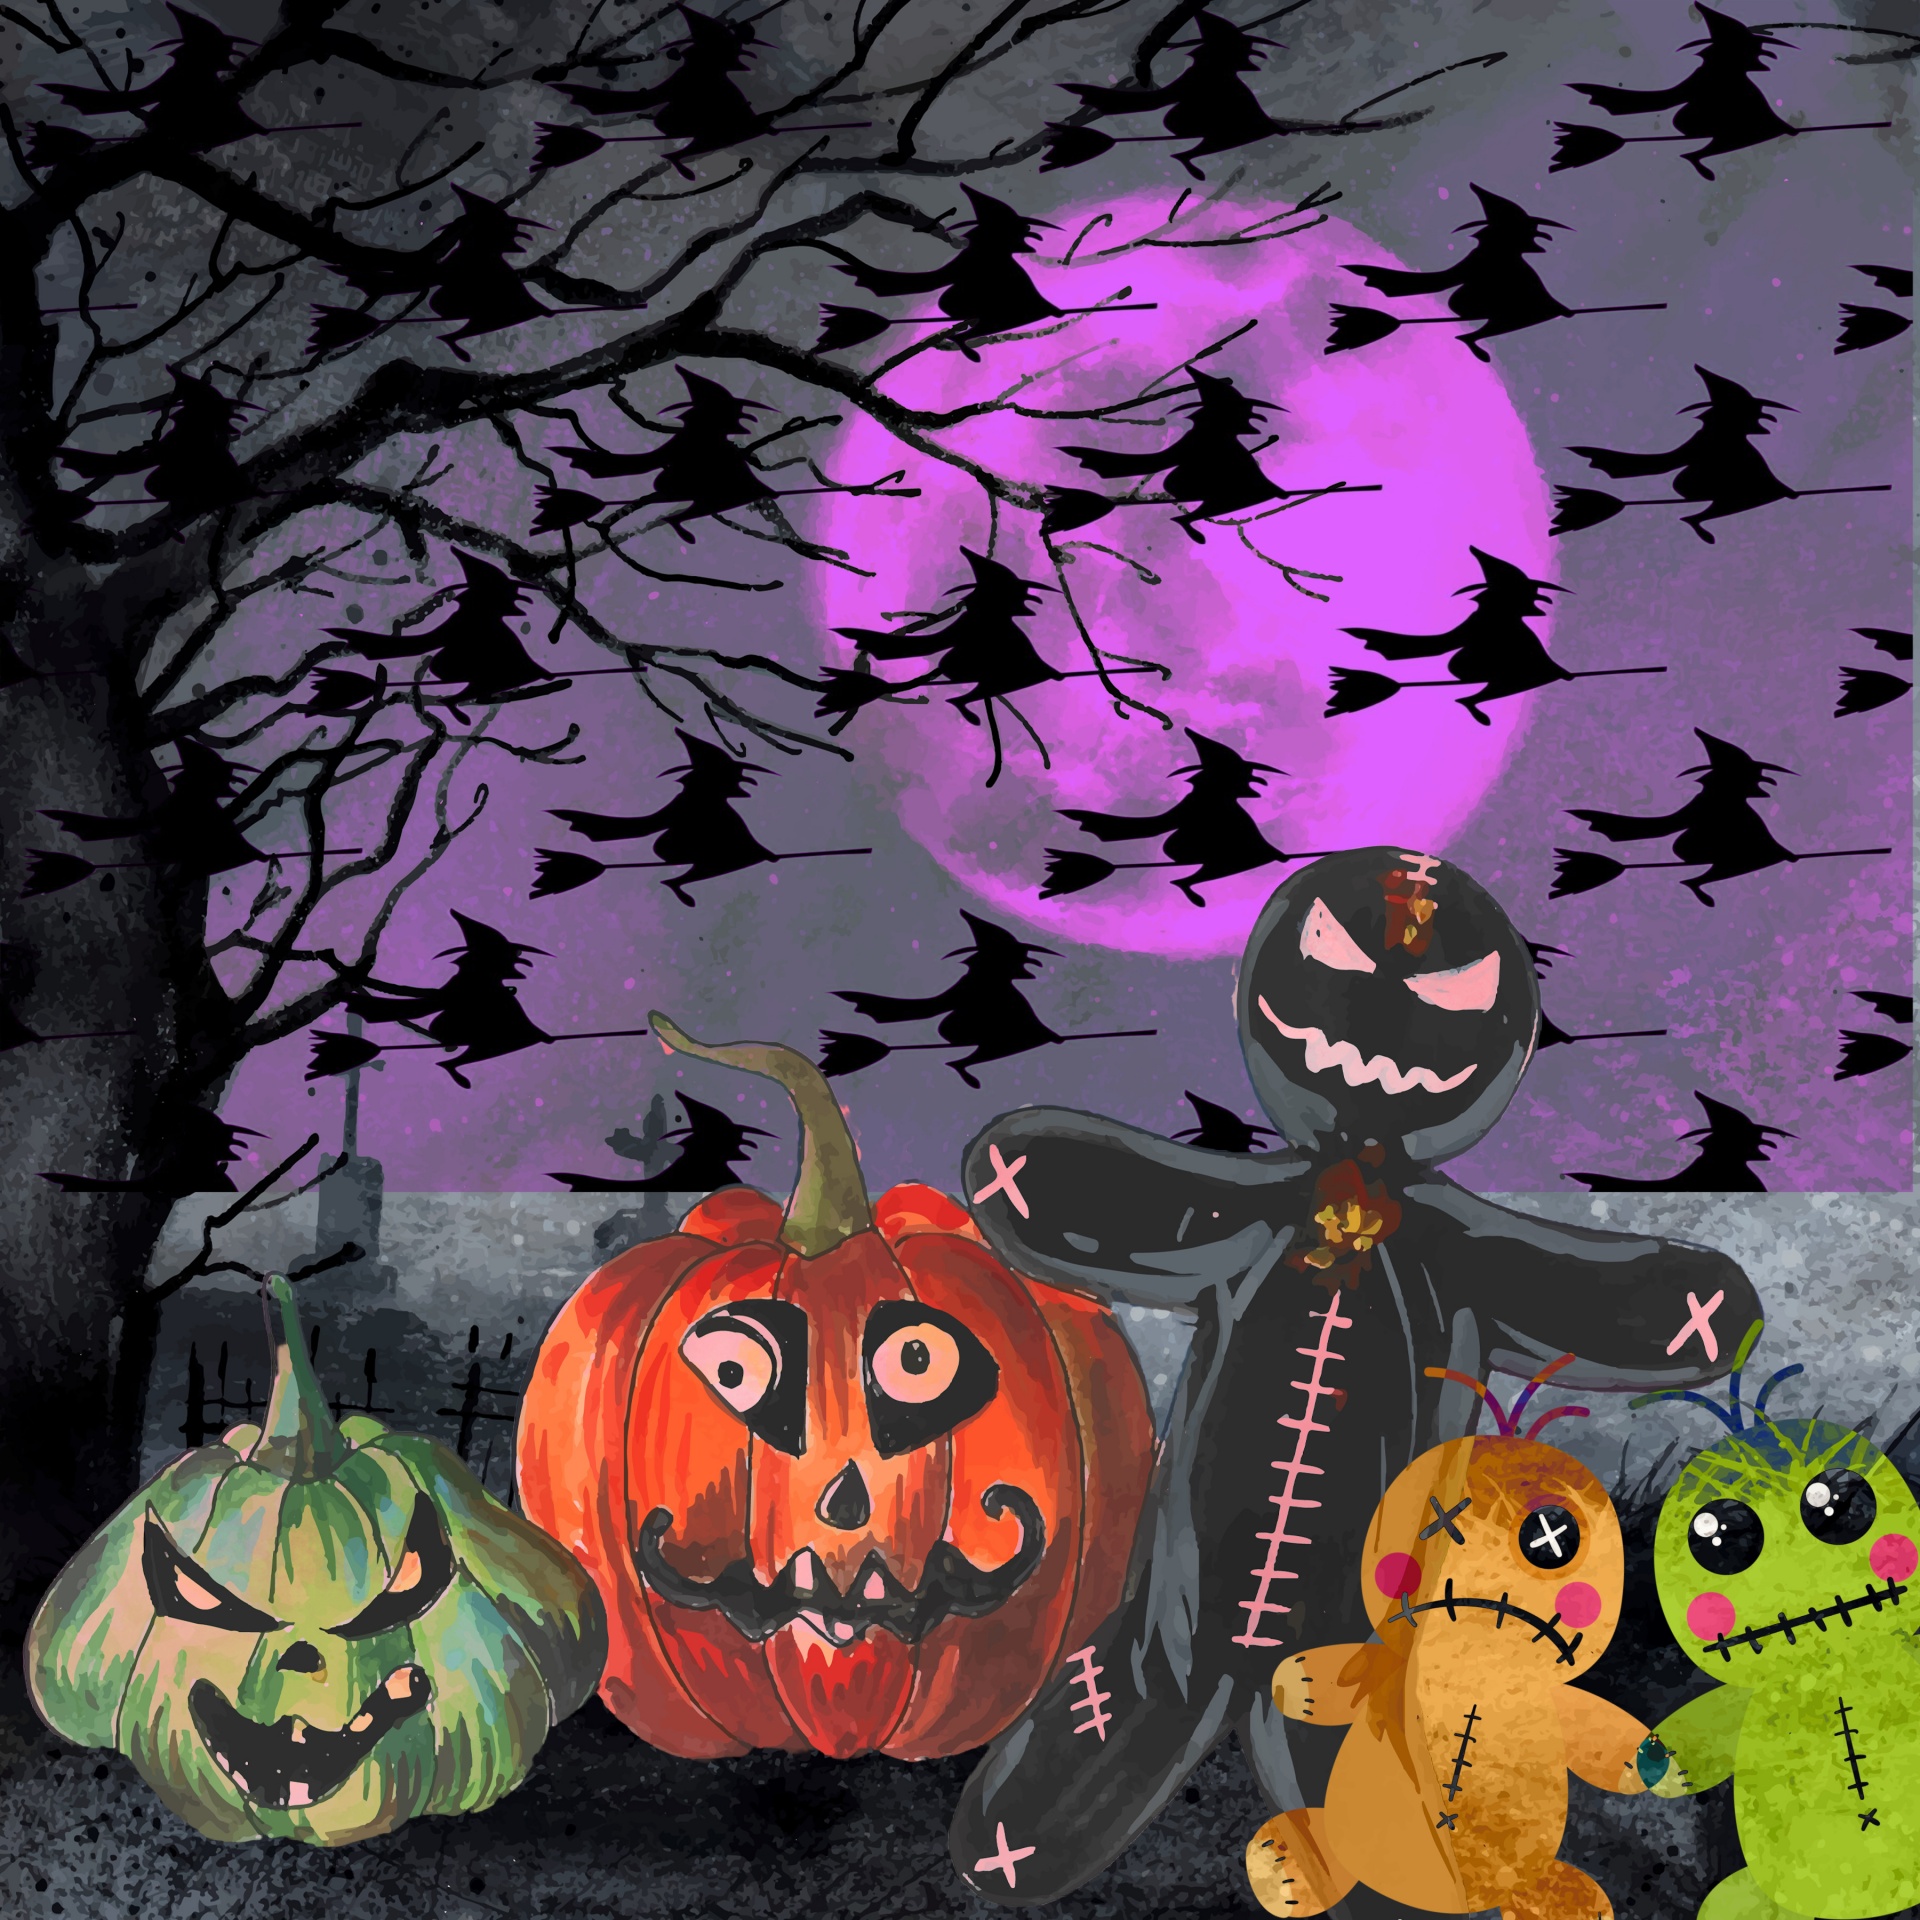 Illustration for Halloween featuring jack-o-lanterns, voodoo dolls, and silhouetted witches flying in the full moon sky